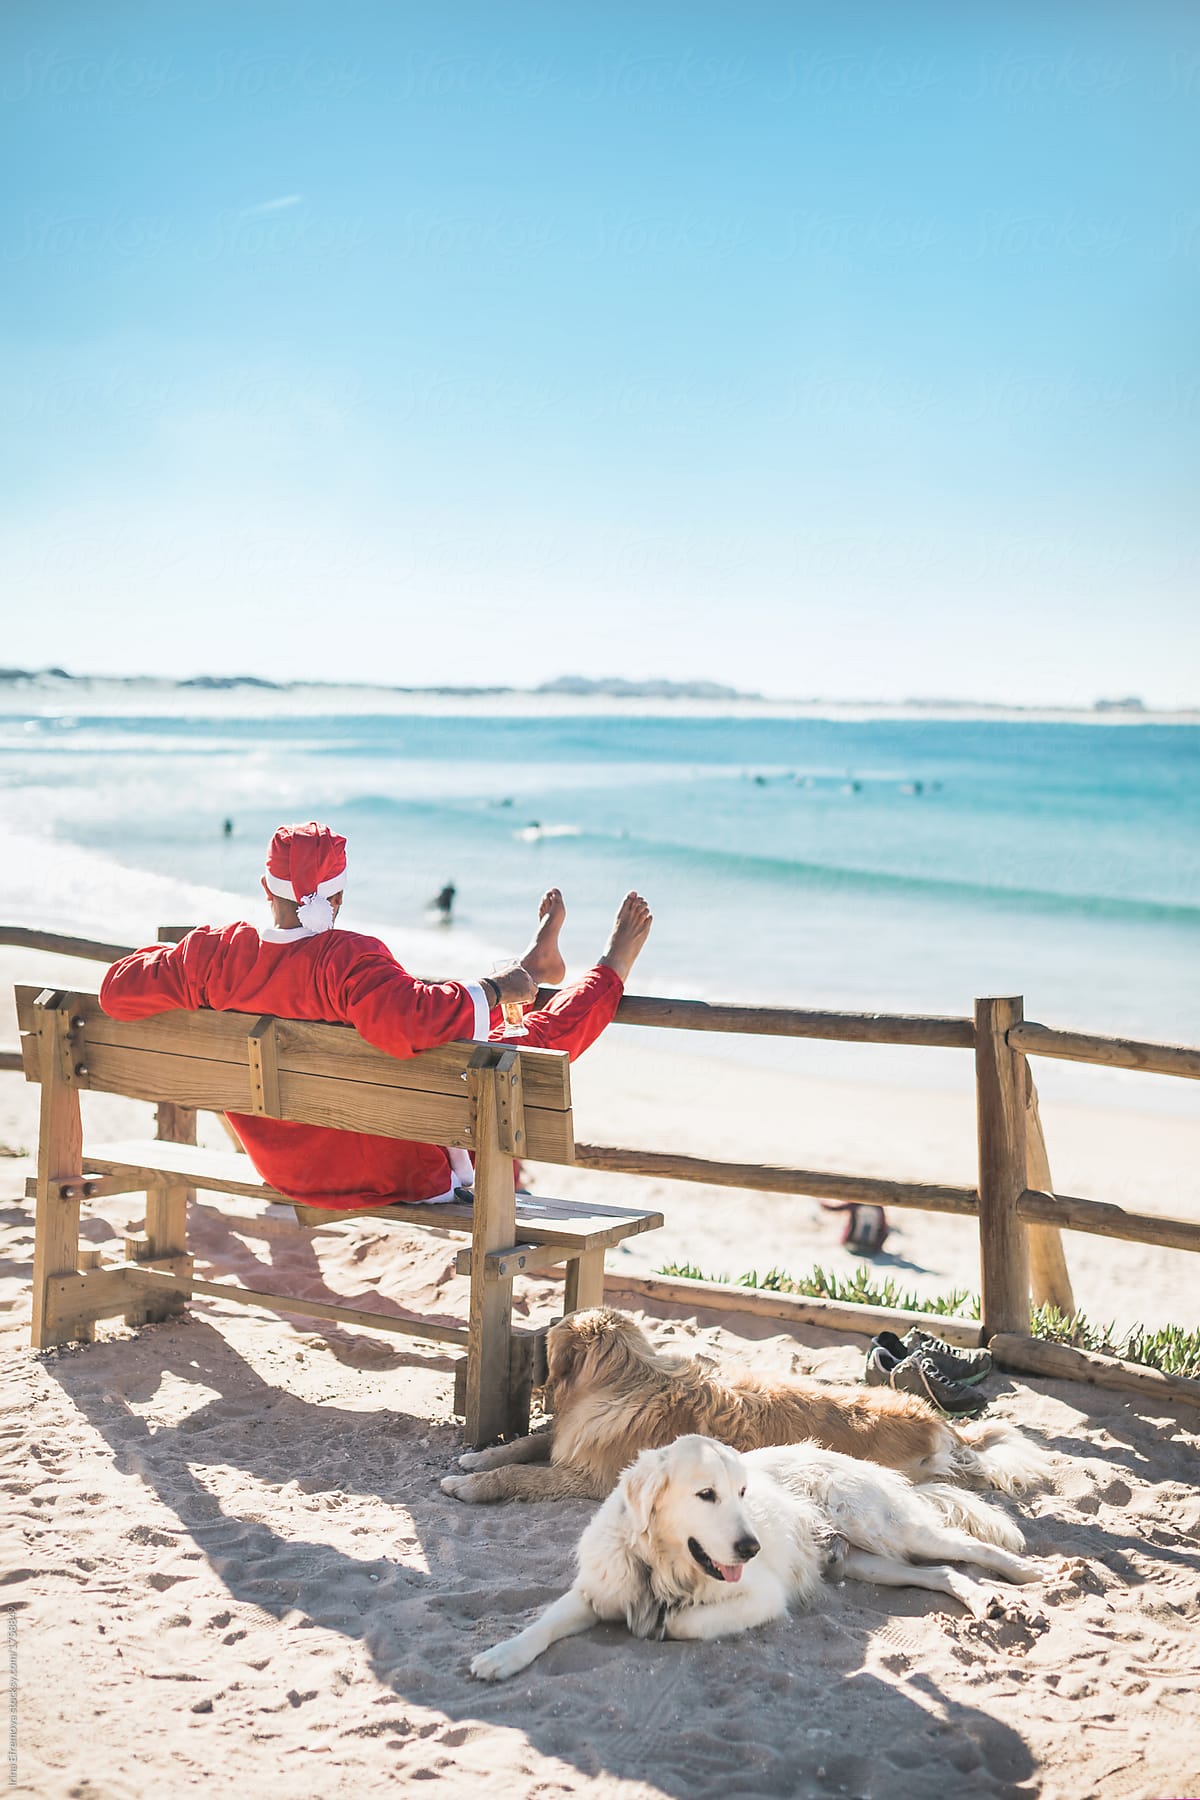 Santa on vacation. Or 26th of December